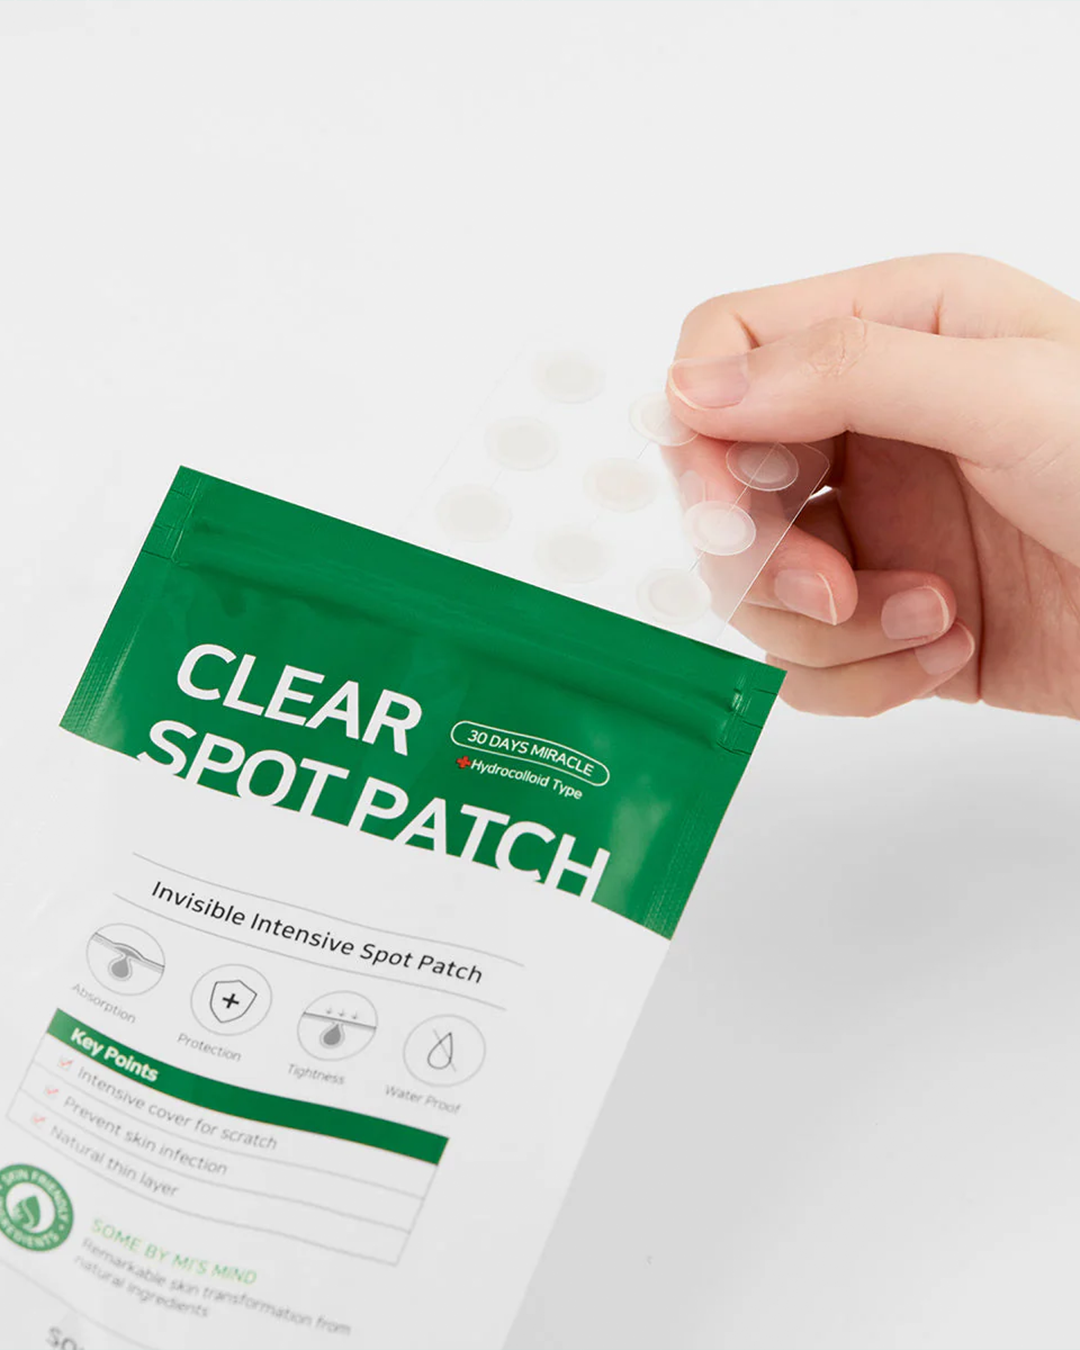 [Some By Mi] Clear Spot Patch